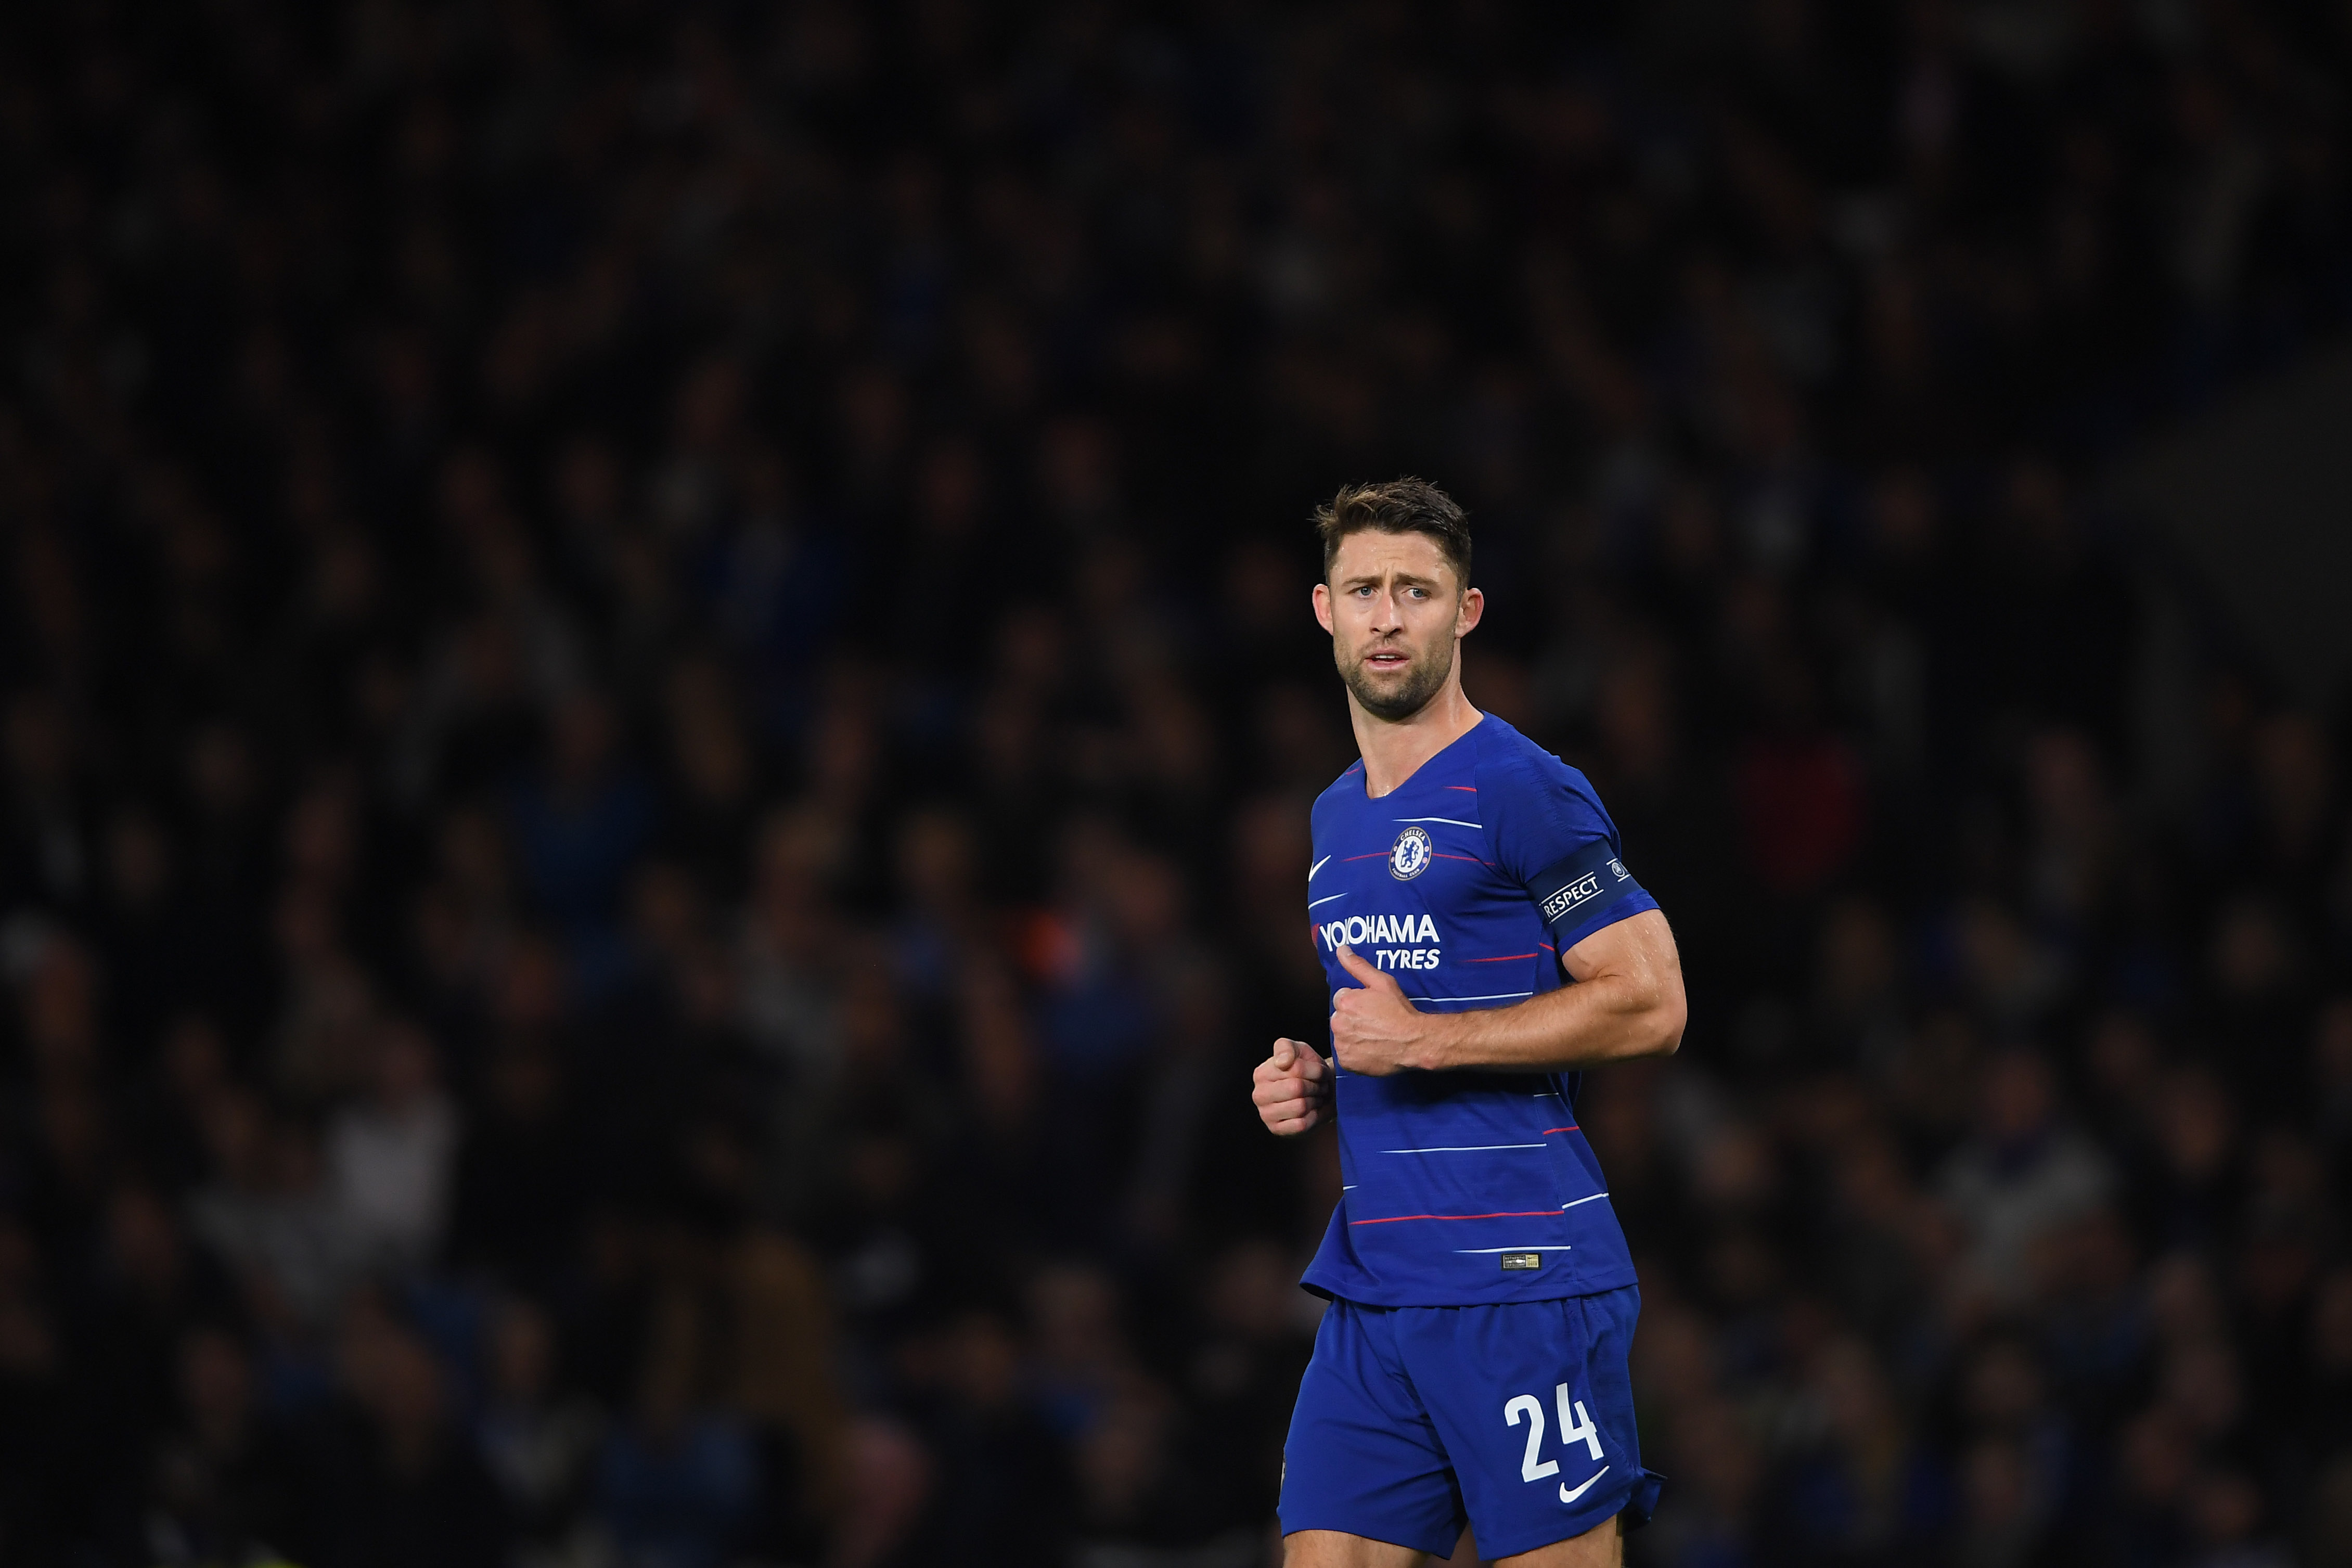 LONDON, ENGLAND - OCTOBER 04:  Gary Cahill of Chelsea looks on during the UEFA Europa League Group L match between Chelsea and Vidi FC at Stamford Bridge on October 4, 2018 in London, United Kingdom.  (Photo by Mike Hewitt/Getty Images)